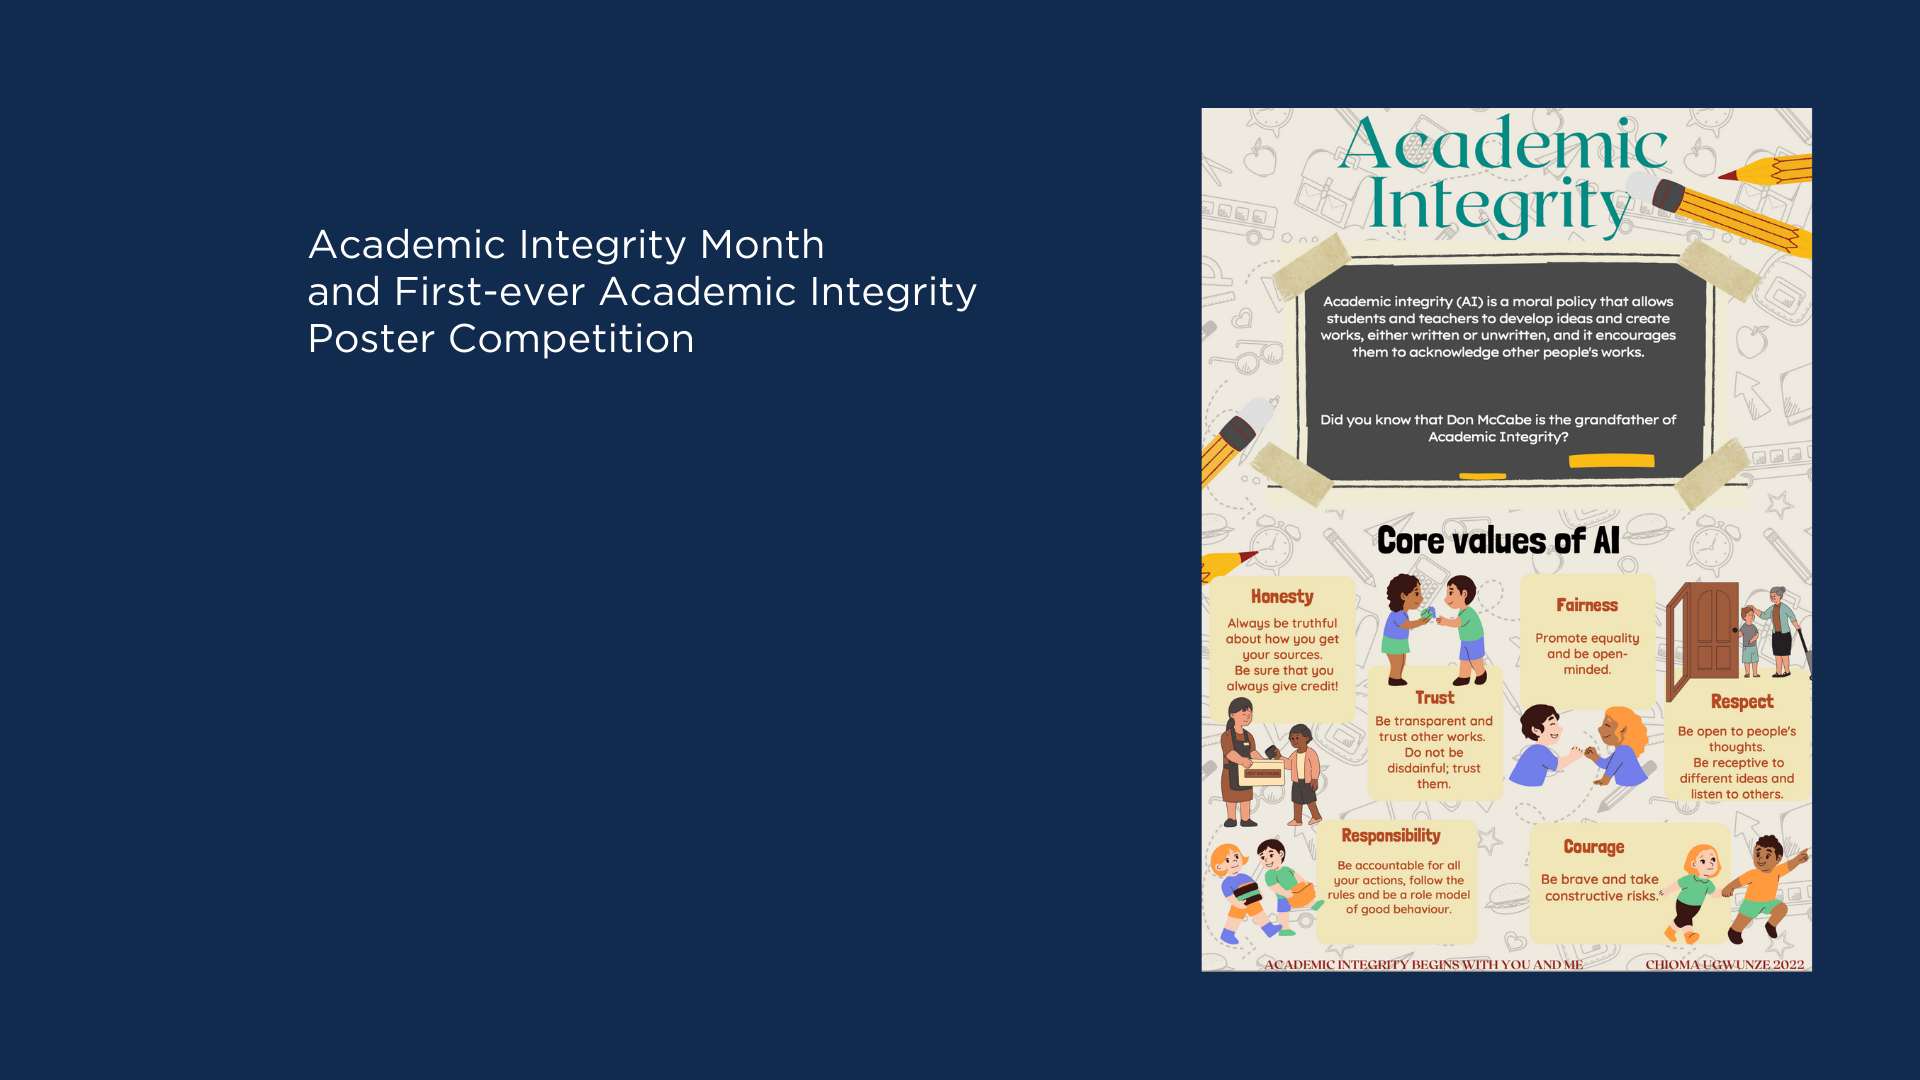 Academic Integrity Month